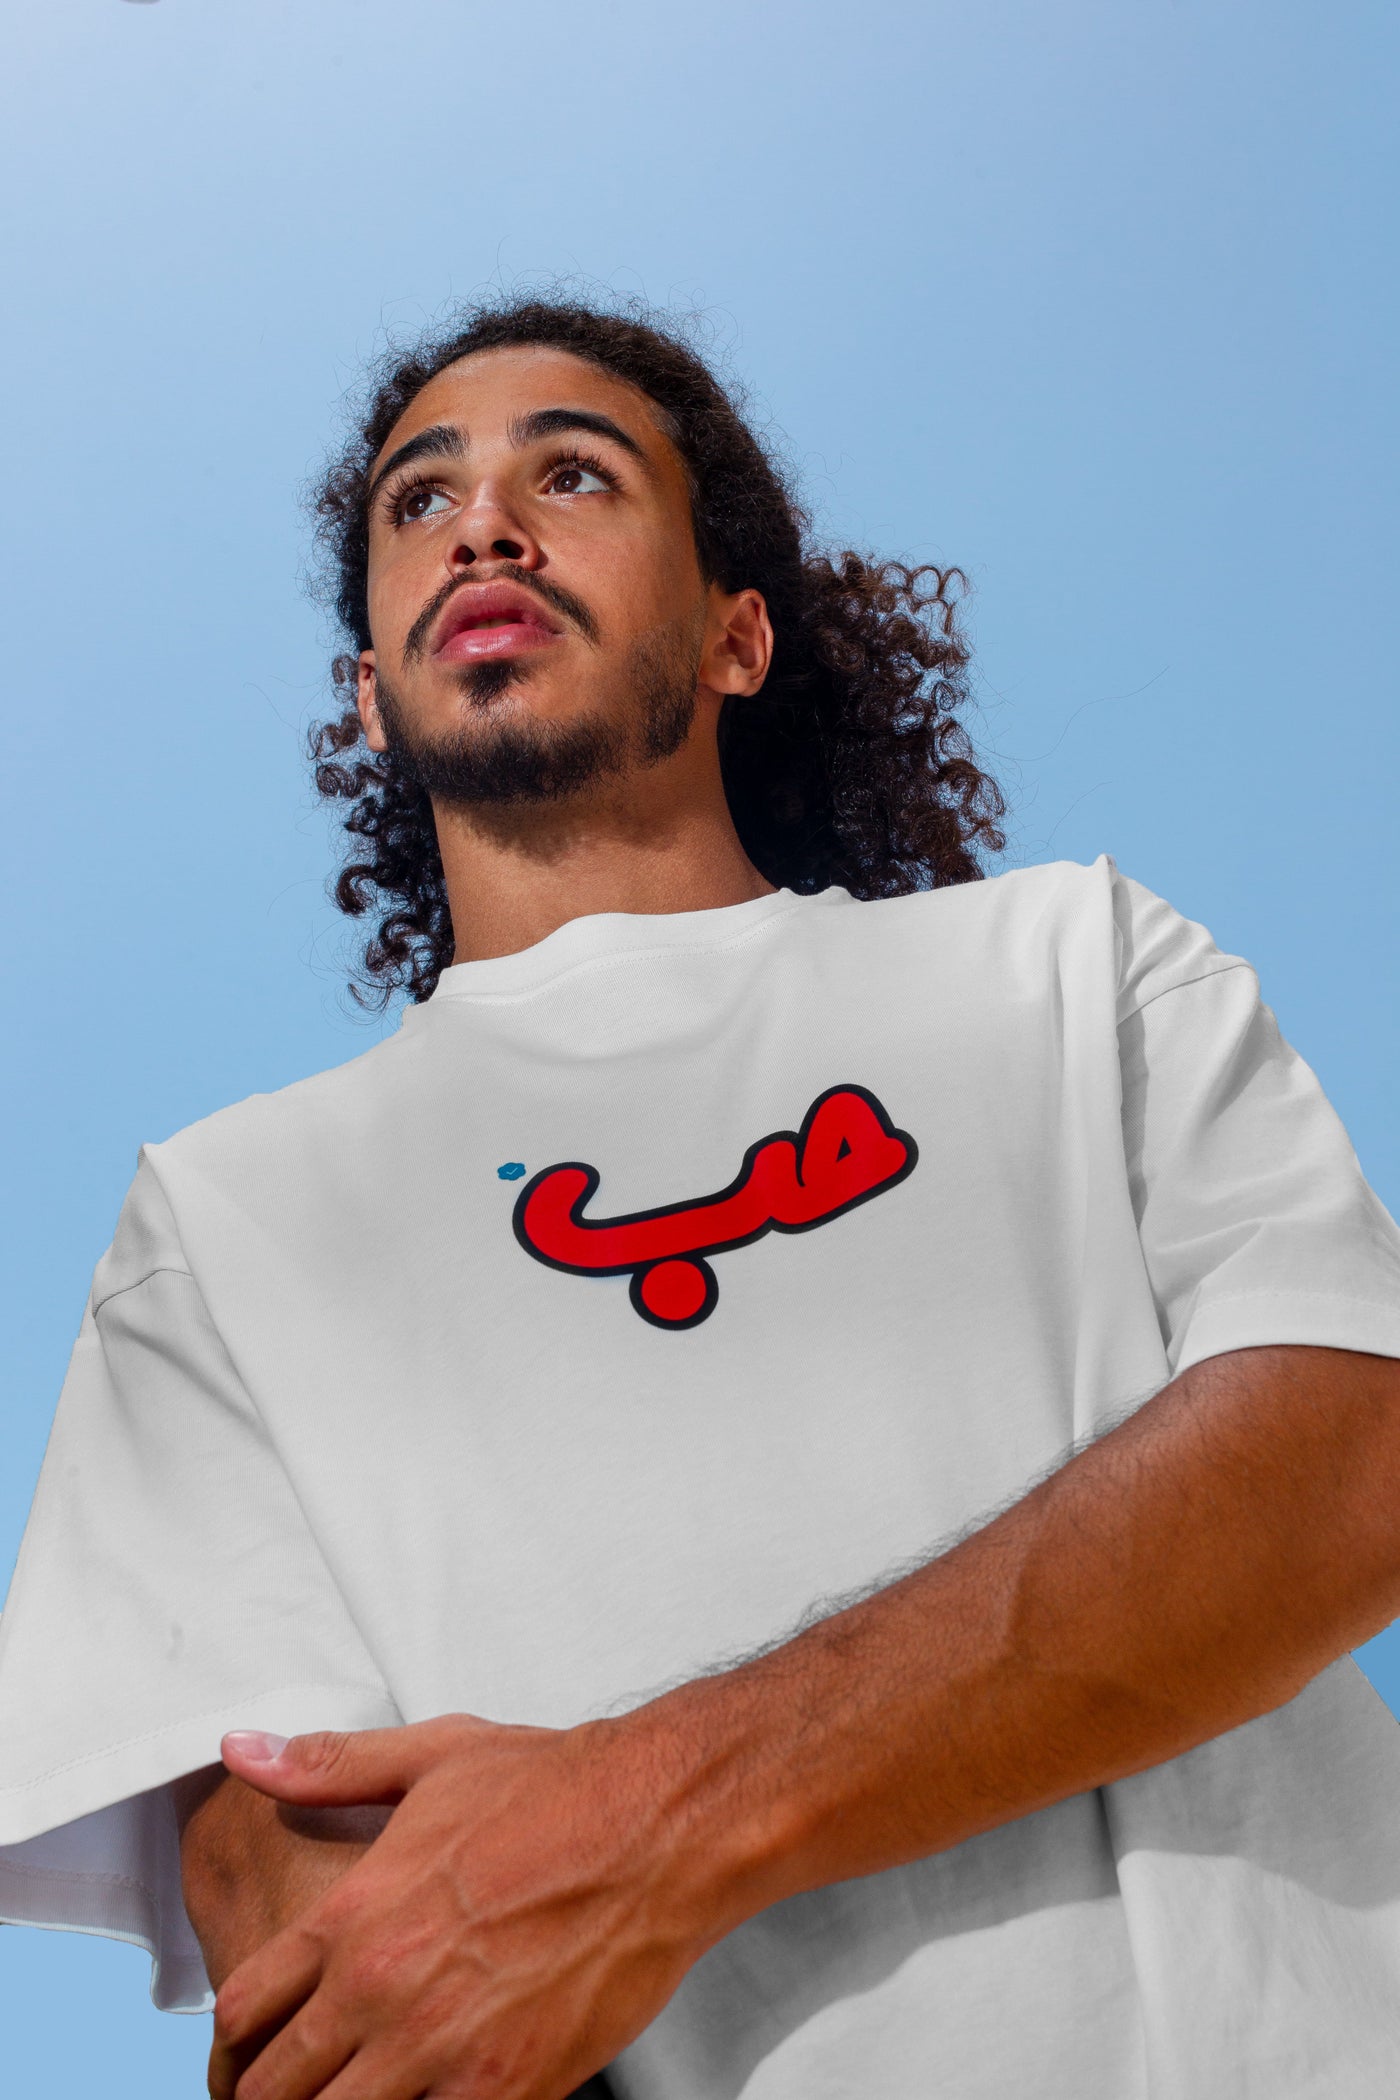 Young adult male wearing an oversized white t-shirt with Verified Hobb written in arabic حب and in red silkscreen in the center of the shirt.